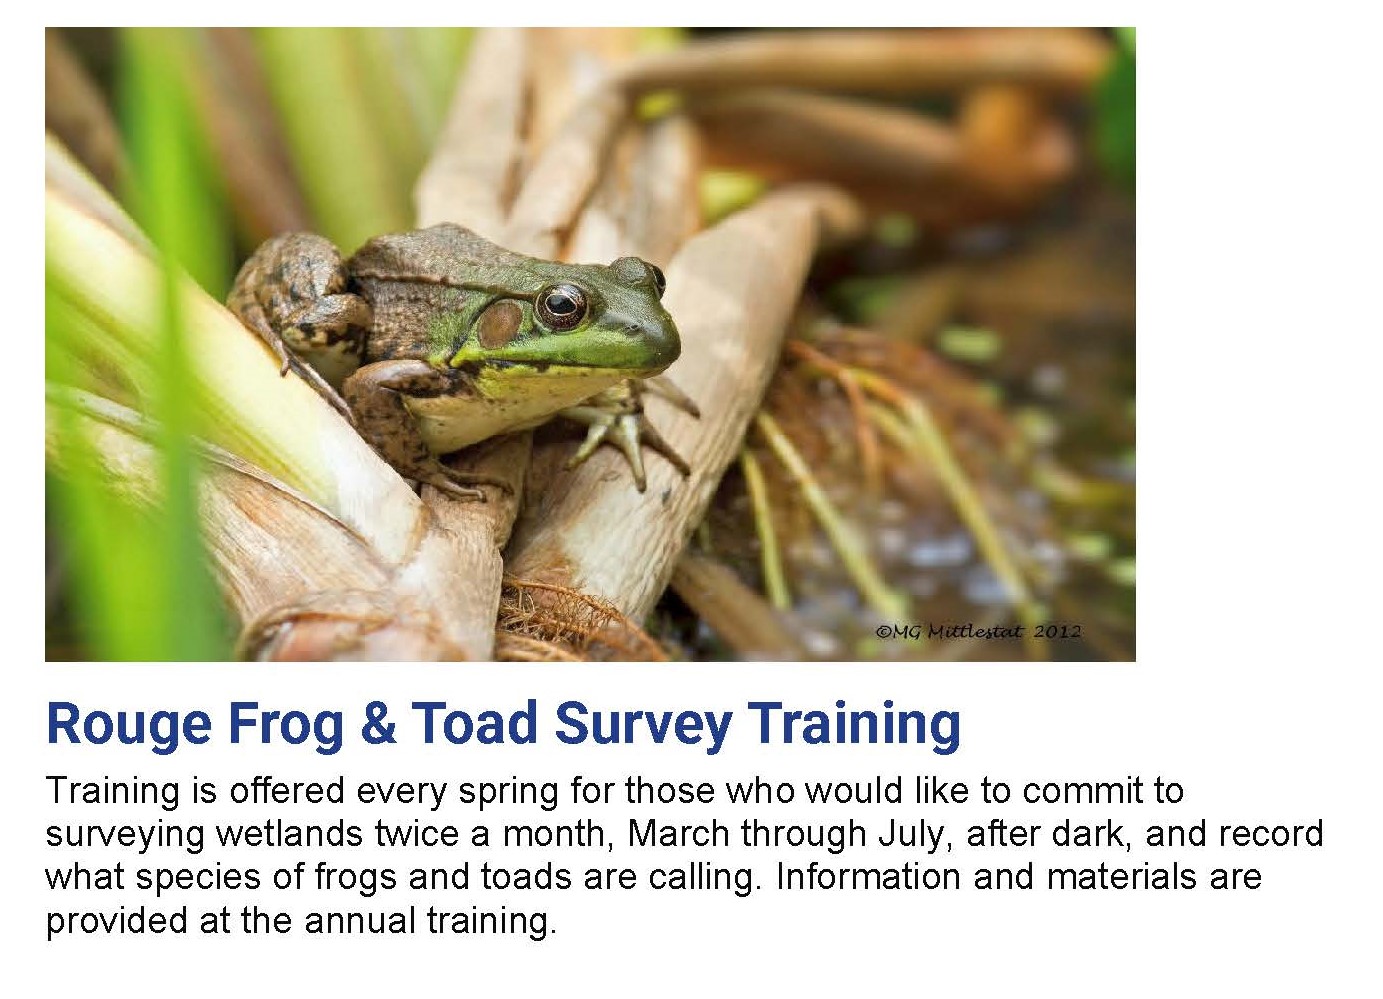 Training is offered in the spring to train those who want to survey wetlands twice a month, March through July. Image is a toad in wetlands.